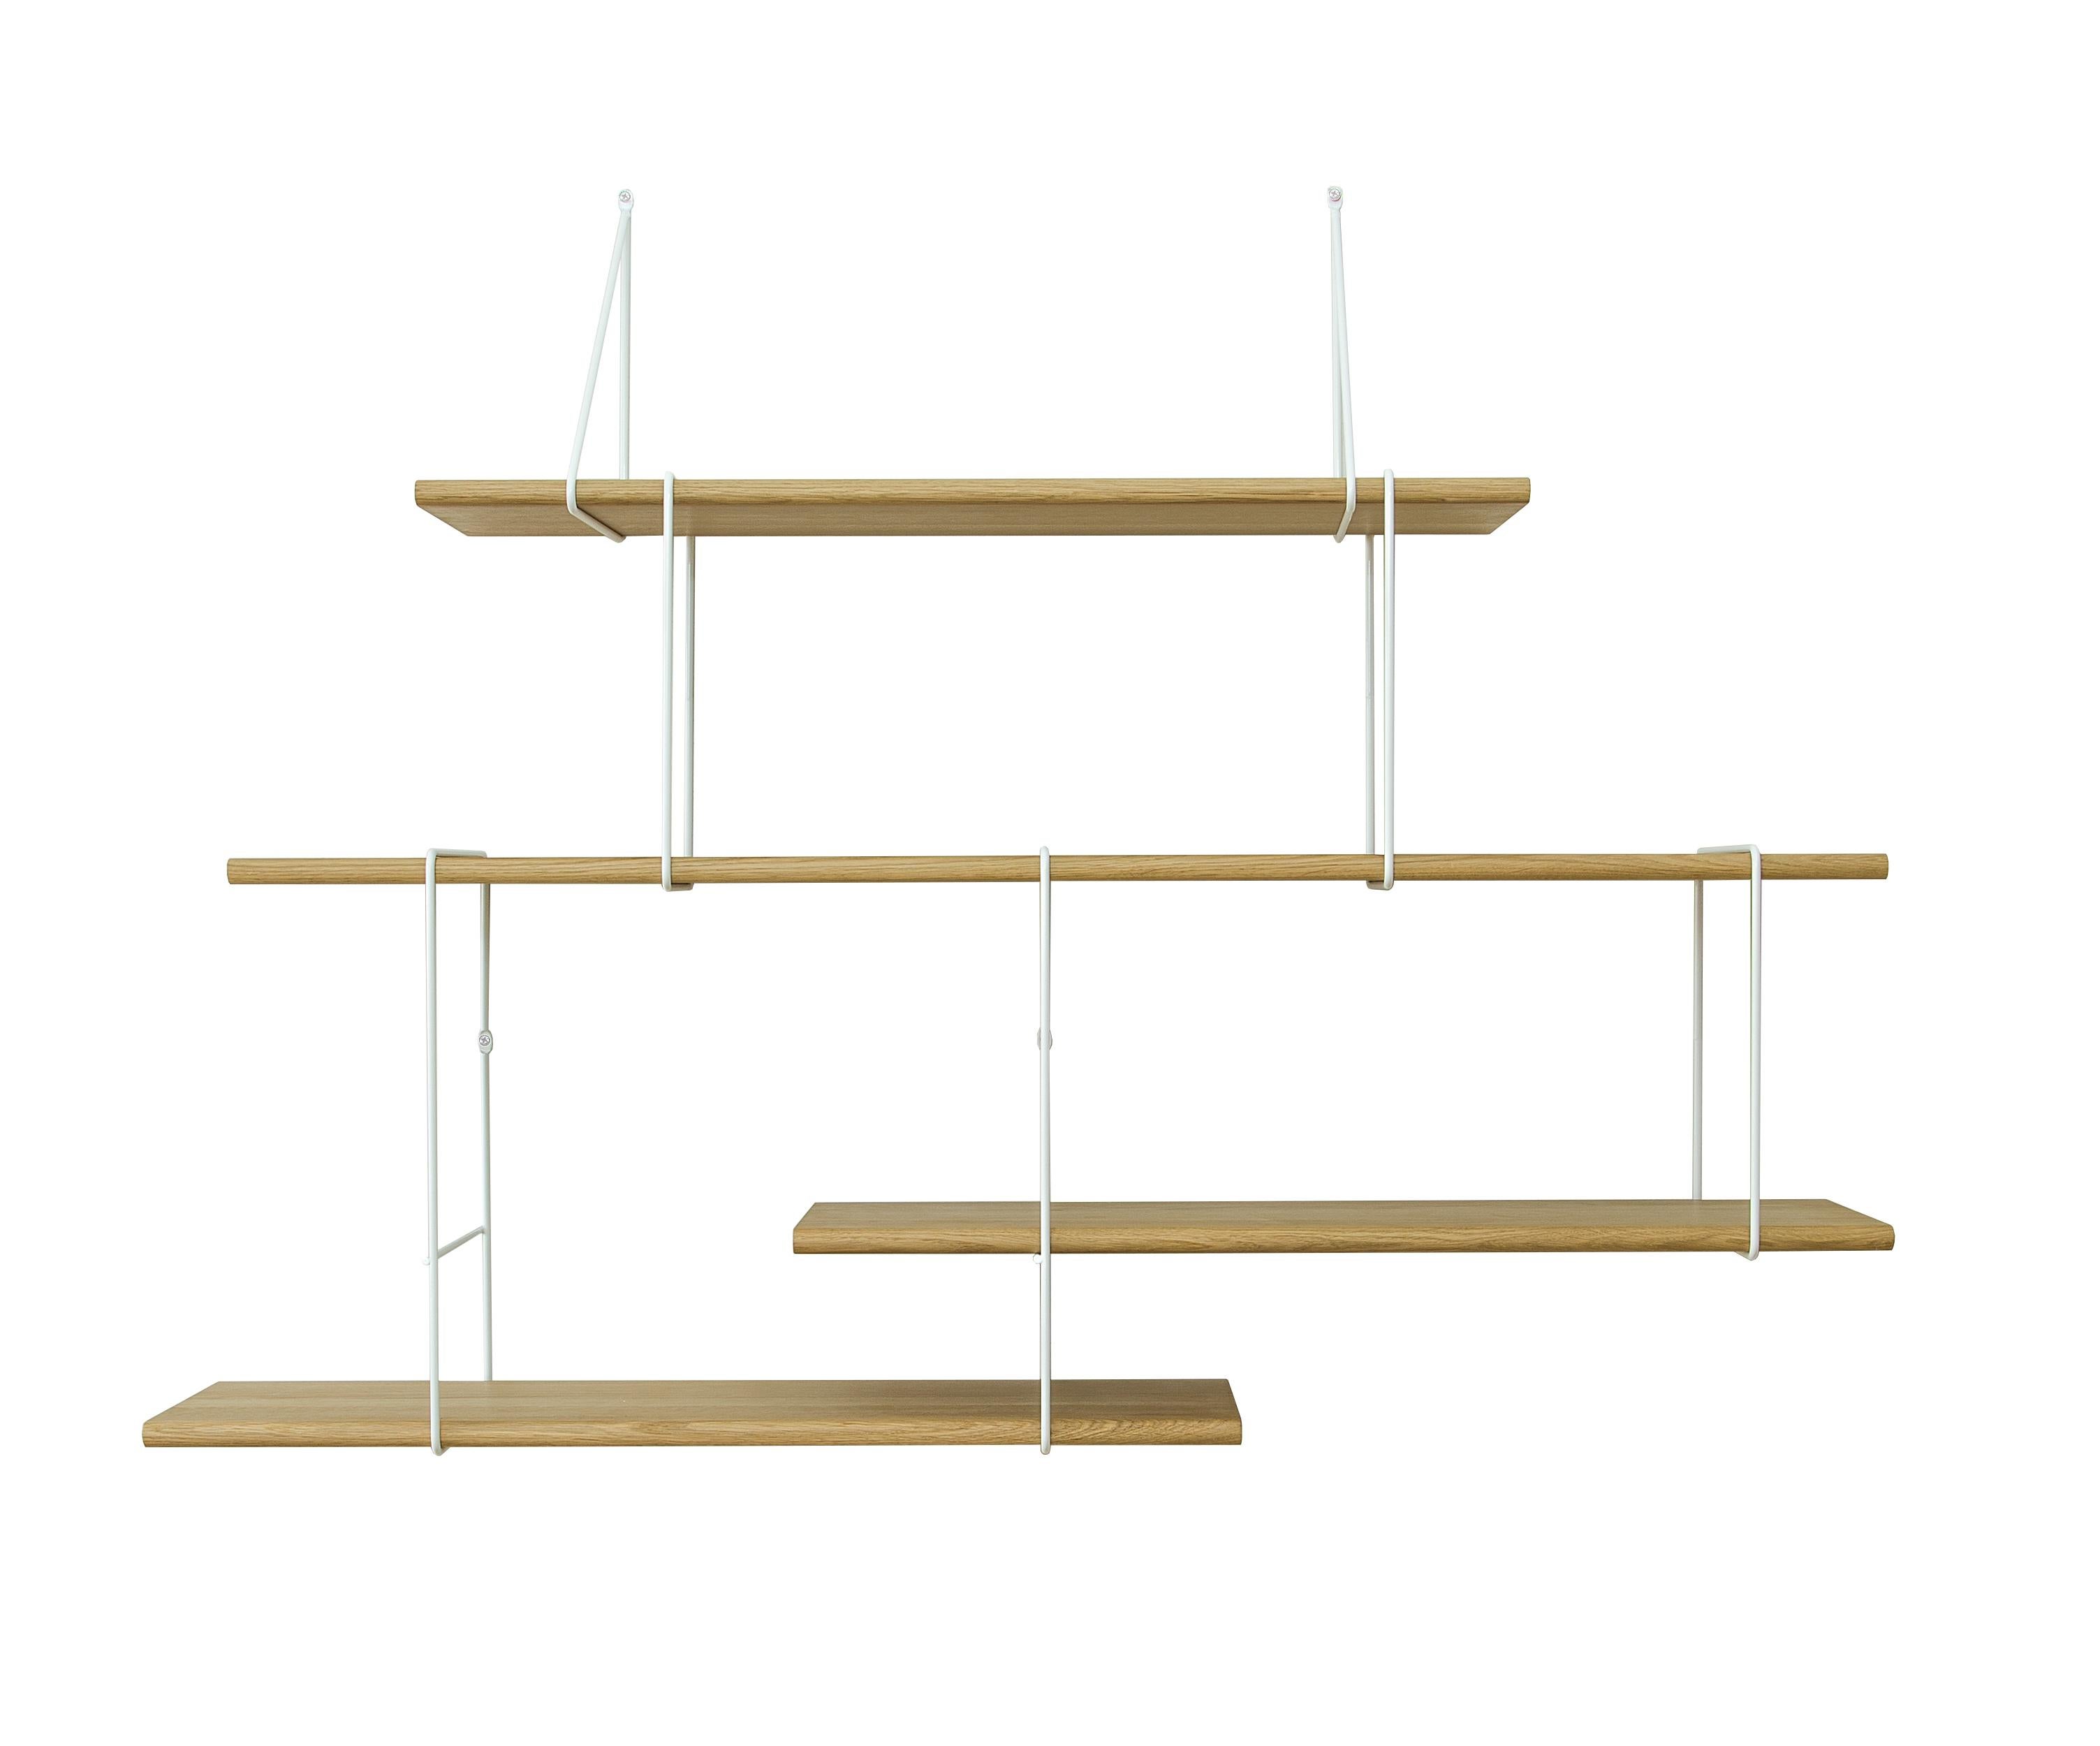 The LINK shelf is display and storage stripped down to the essentials. Its steel and wood construction forms an engaging interplay with many potential compositions: asymmetrical, highreaching, or laid out lengthwise. It is designed to work perfectly